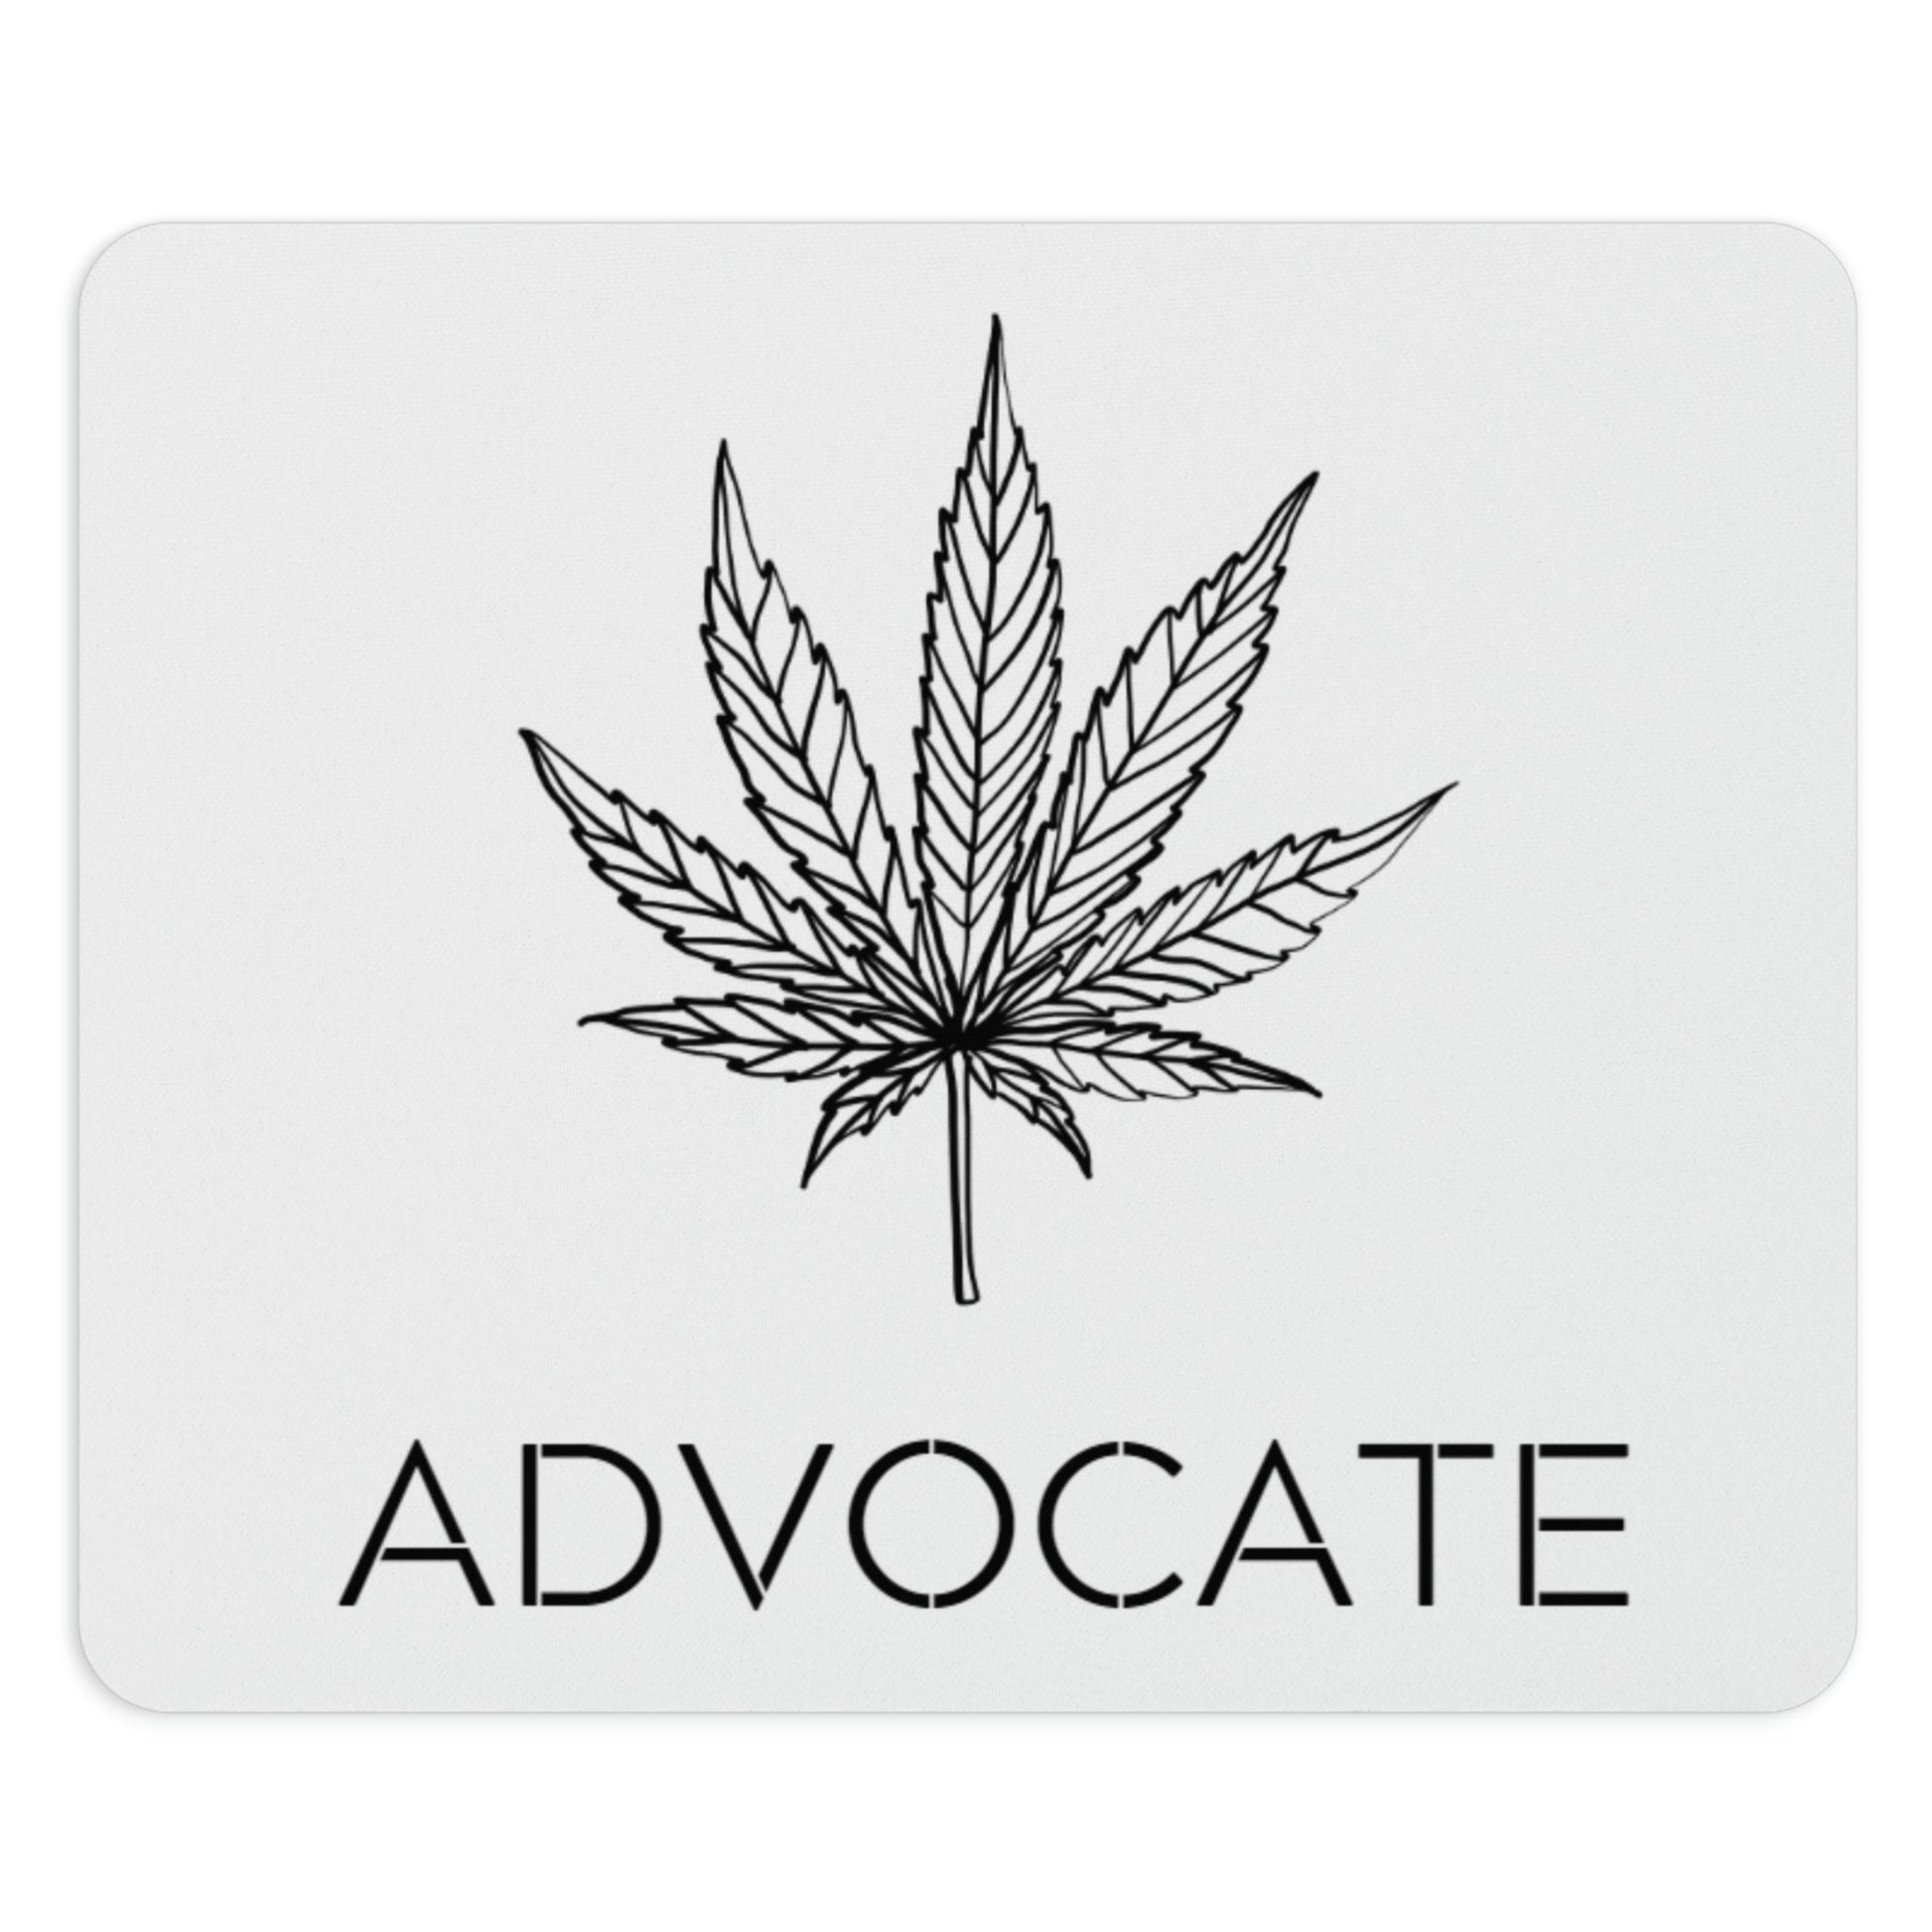 a Cannabis Advocate Mouse Pad with the word advocate on it.